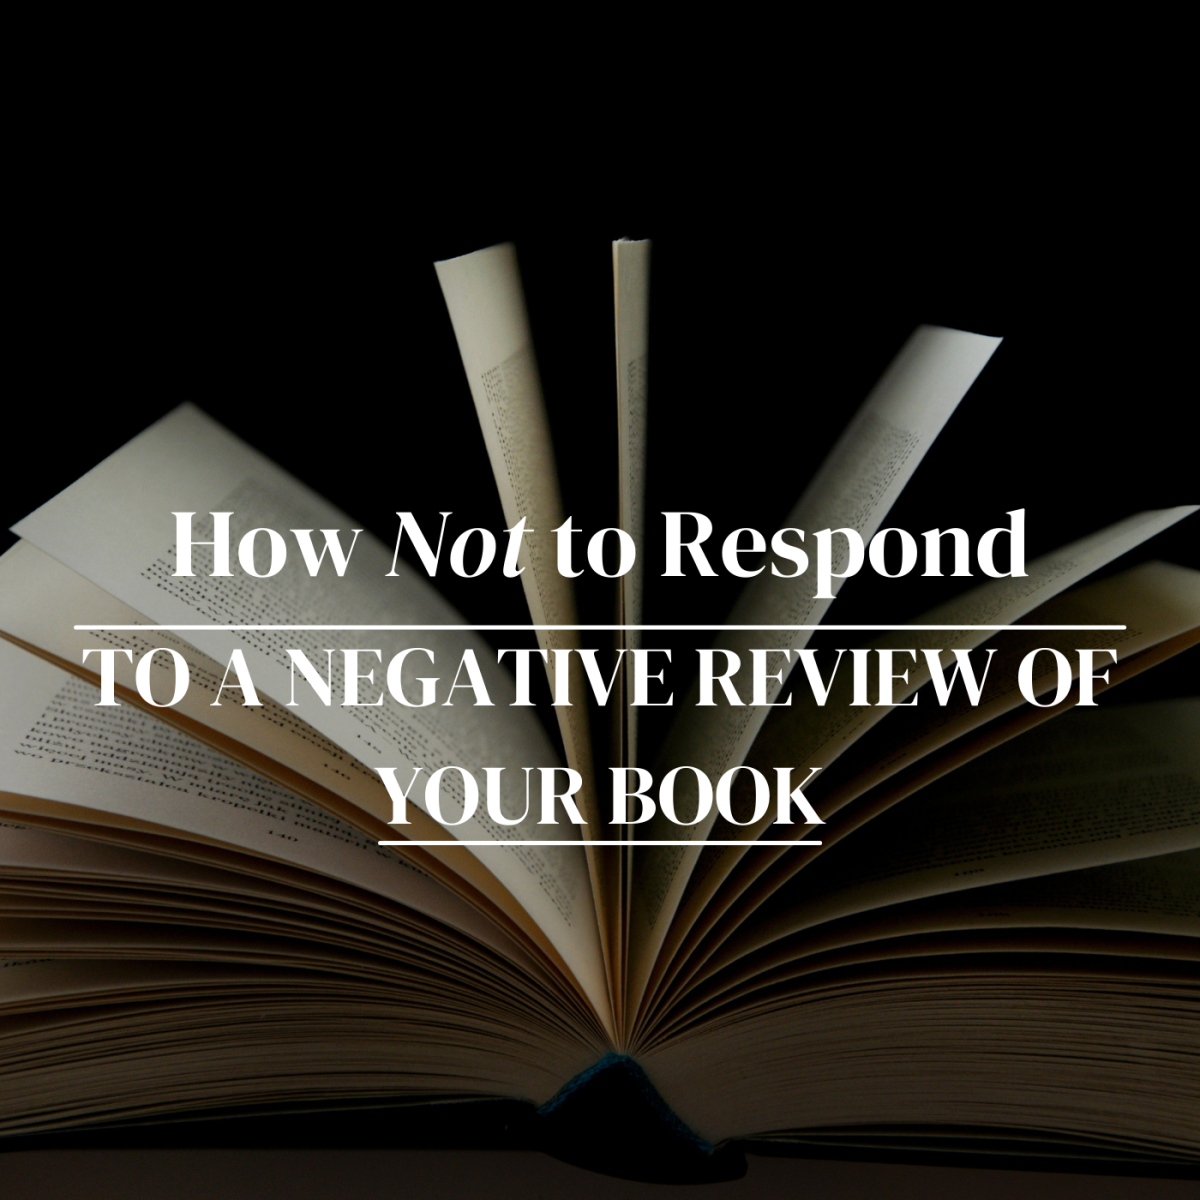 Coping With Negative Reviews of Your Book